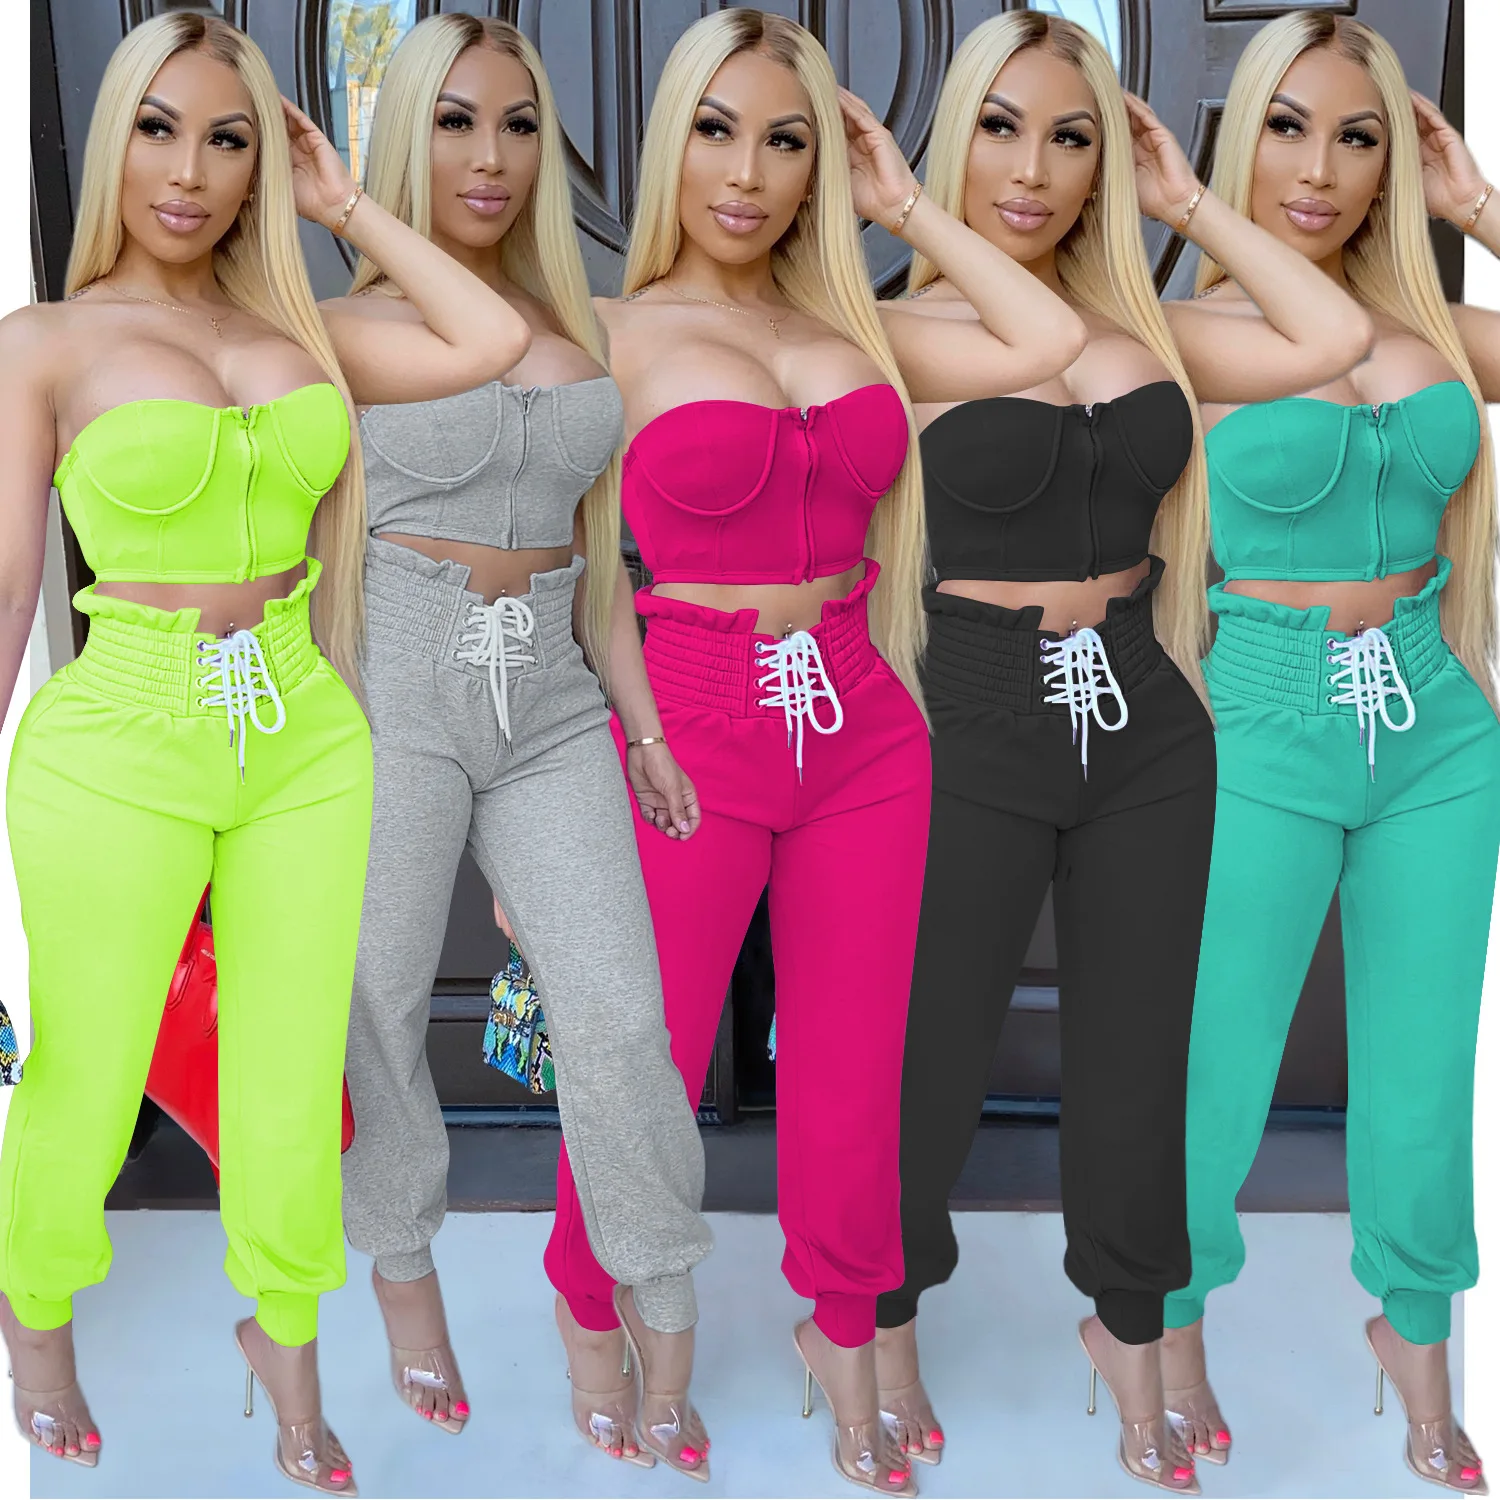 

2021 New Arrivals Solid Women Sleevless Top Two Piece Pant Set Summer Ladies Sexy Corset Casual Suit Women Clothing